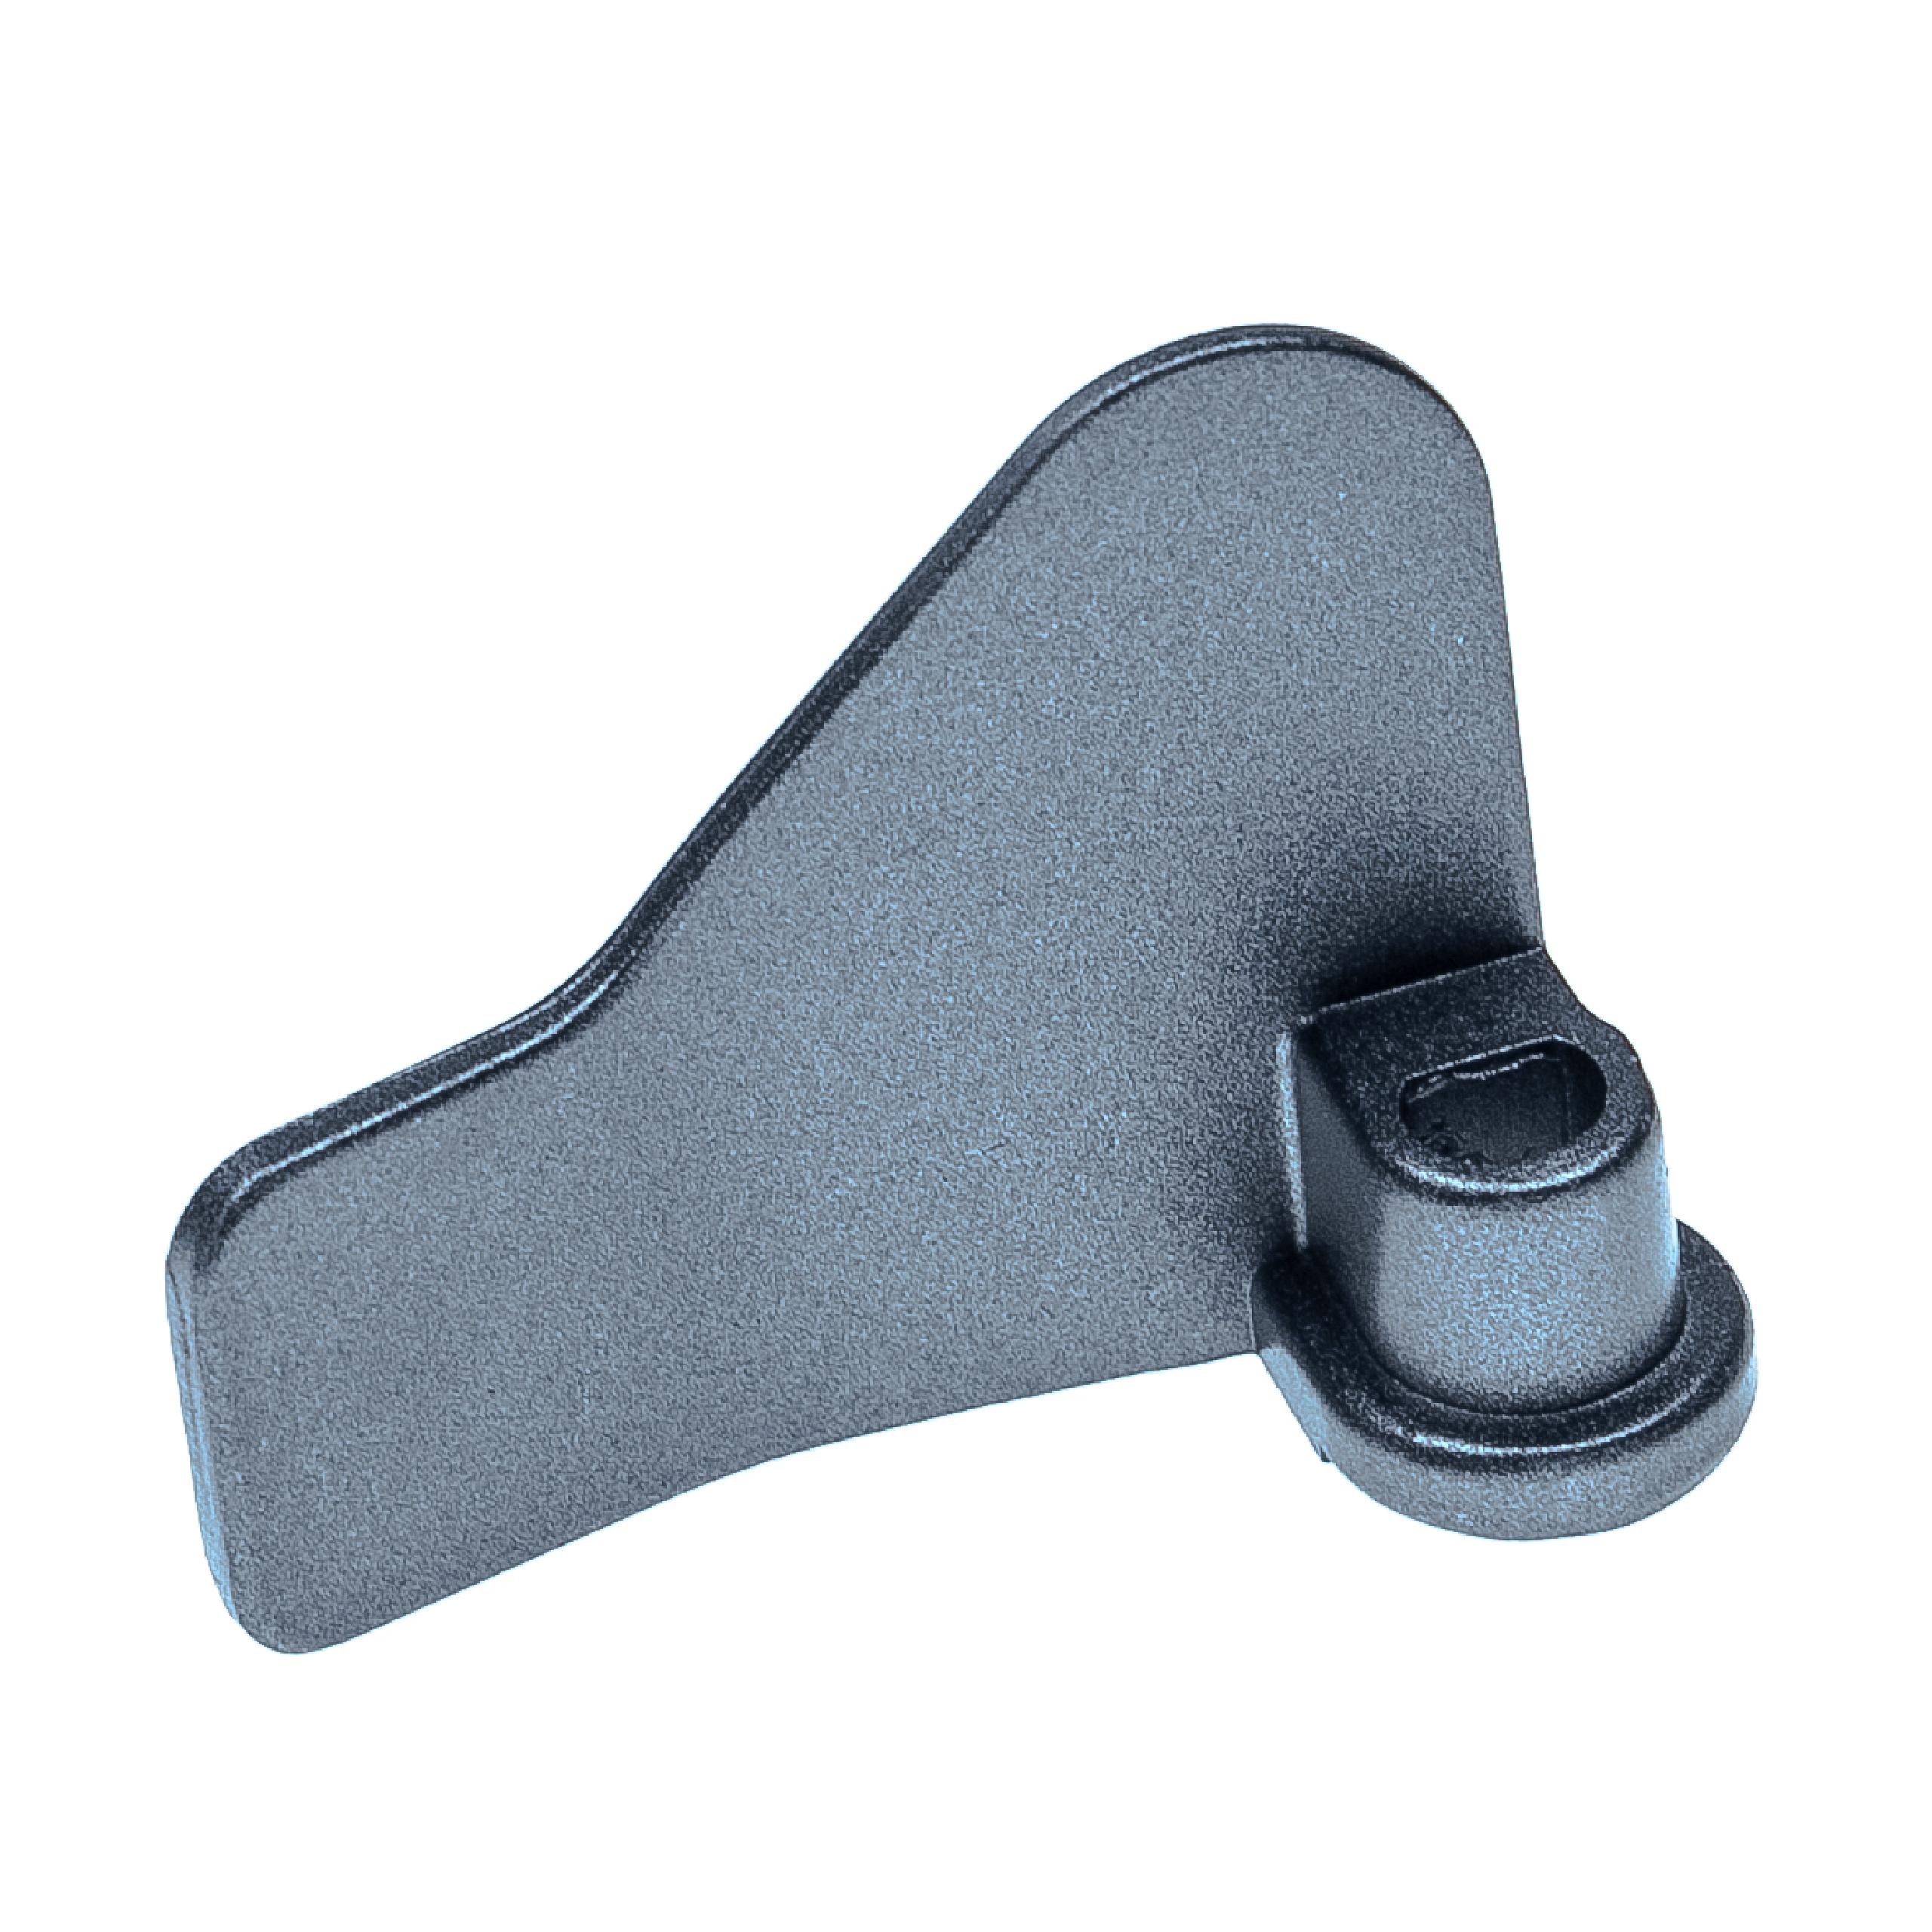 Dough Hook Replacement for KW 712246 for Bread-Maker - Mixing Paddle, grey